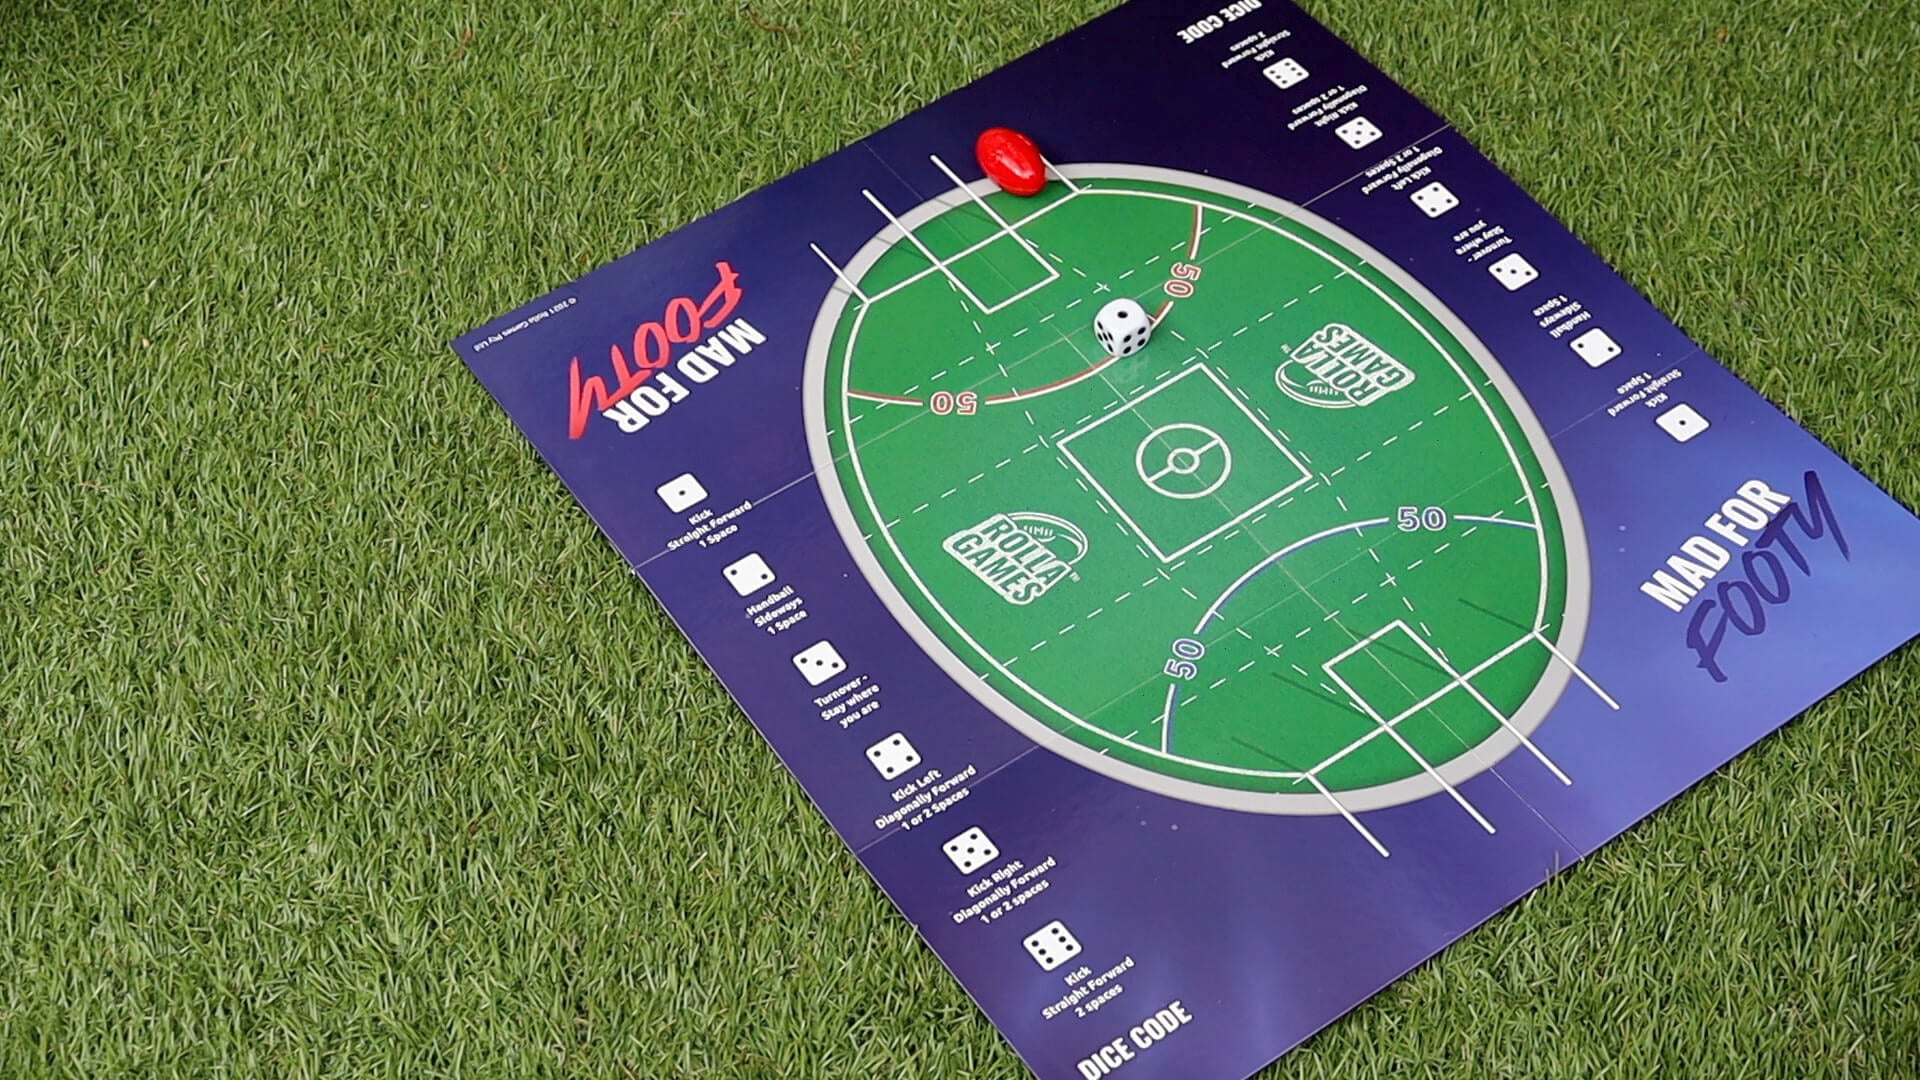 How to score points in AFL football board game.